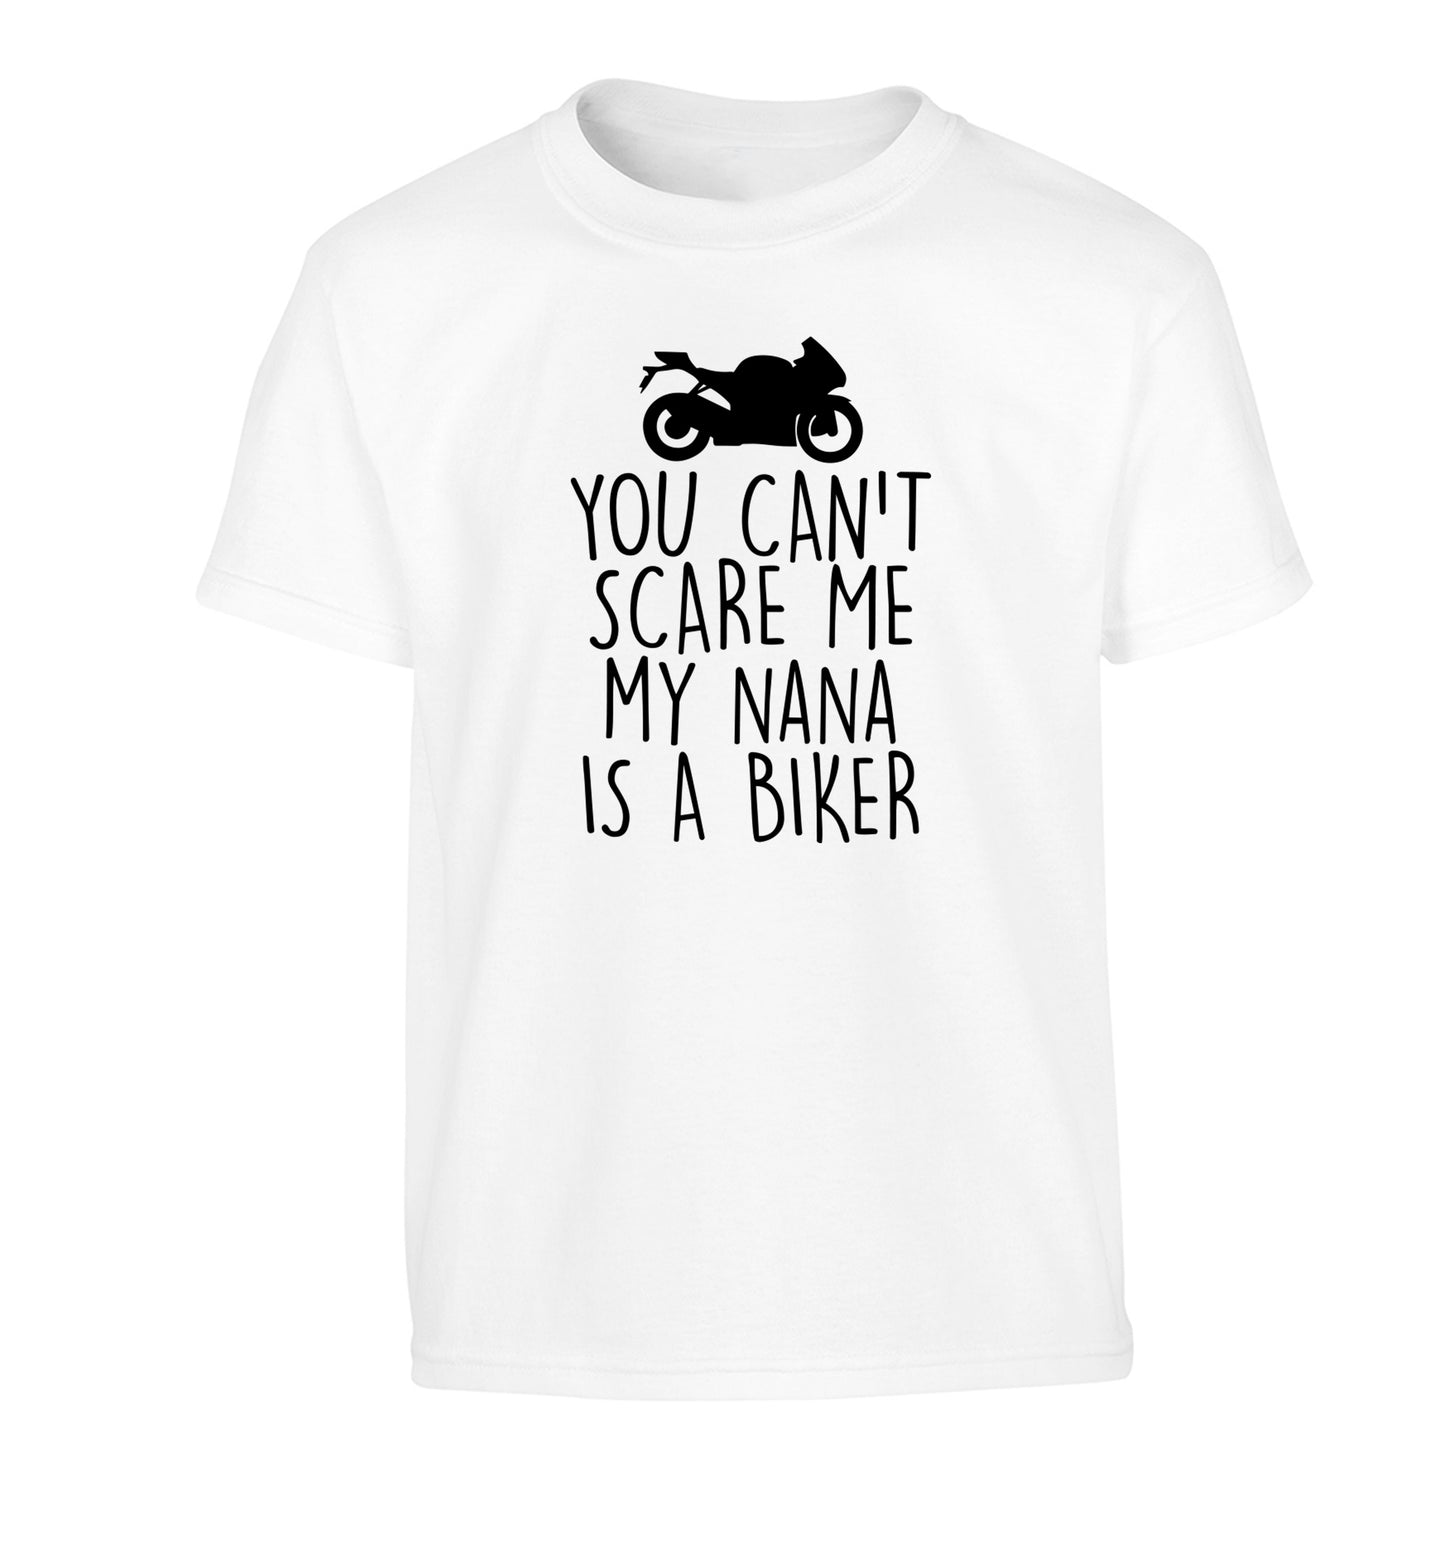 You can't scare me my nana is a biker Children's white Tshirt 12-13 Years